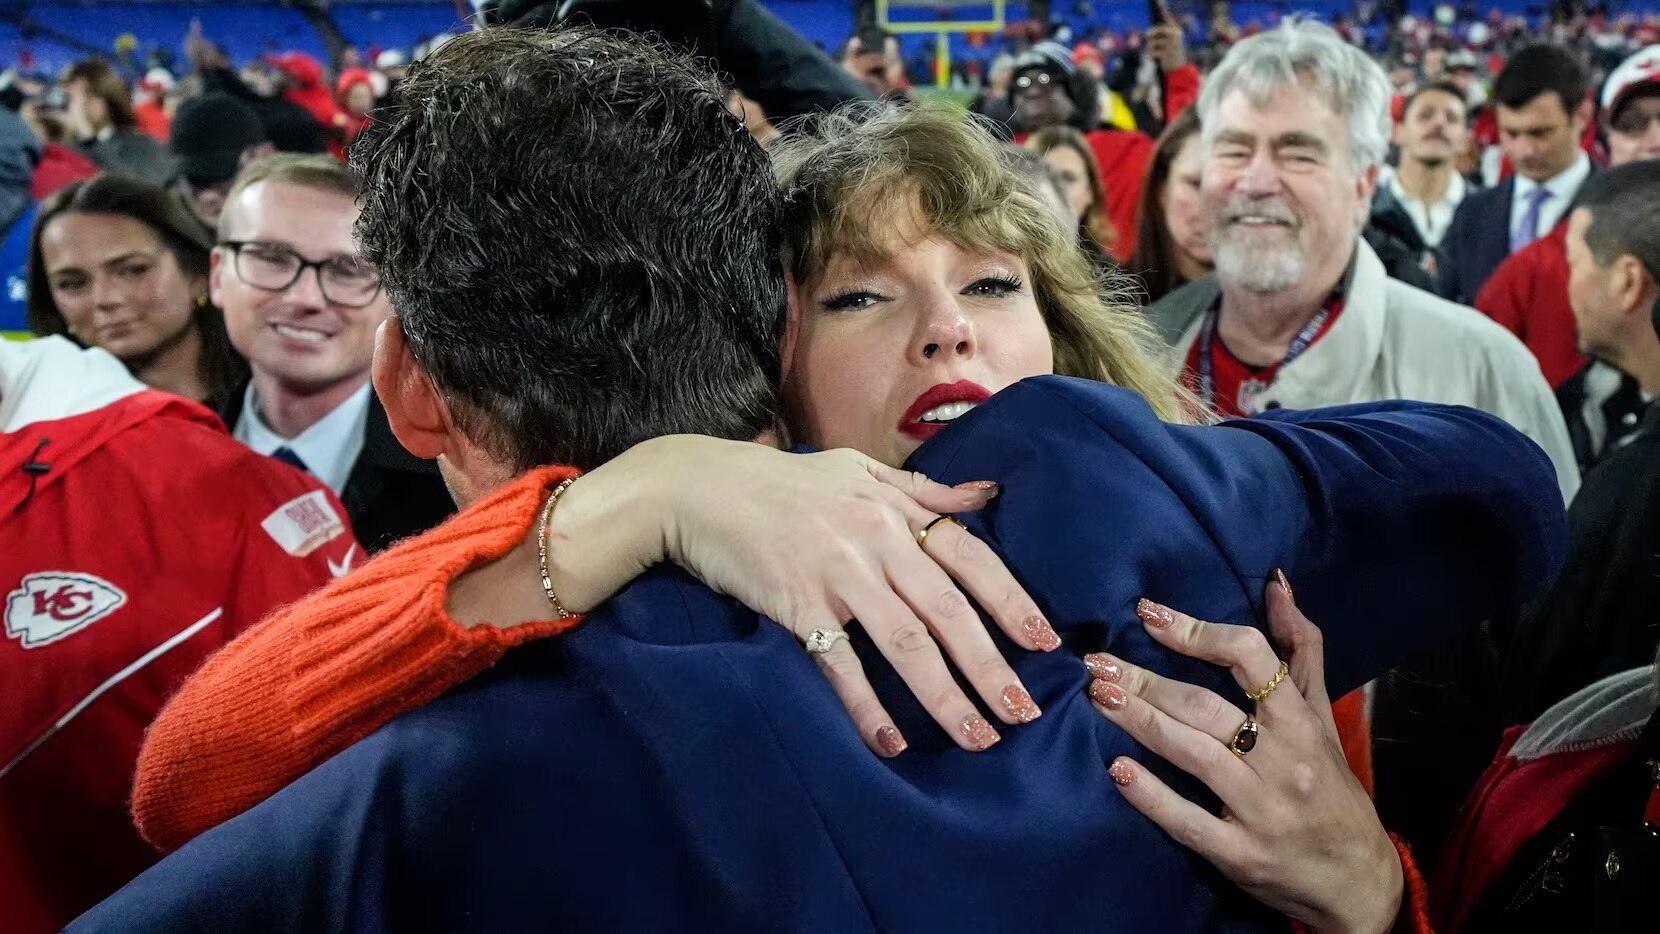 Taylor Swift And Tony Romo Exchange Compliments At AFC Championship Game